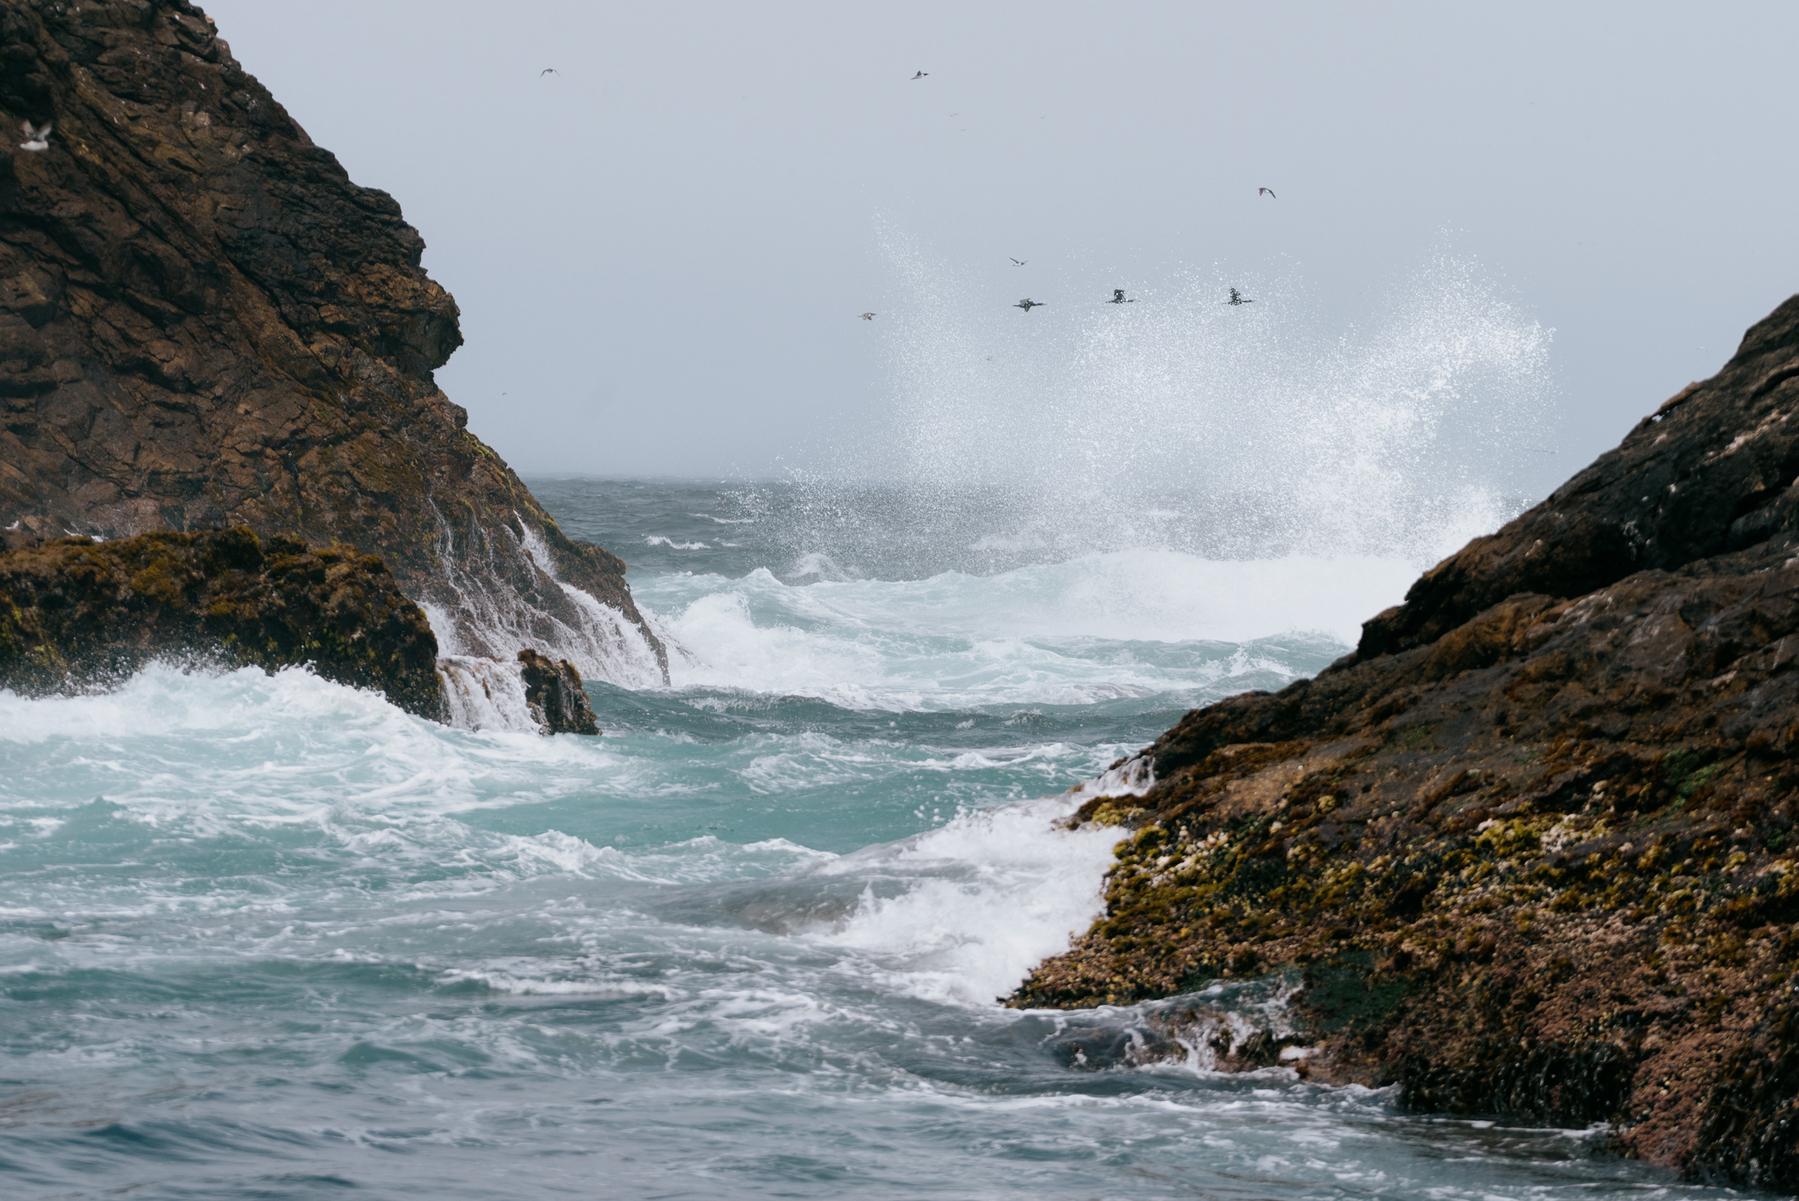 a color photo of some birds flying between rocks in the pacific ocean